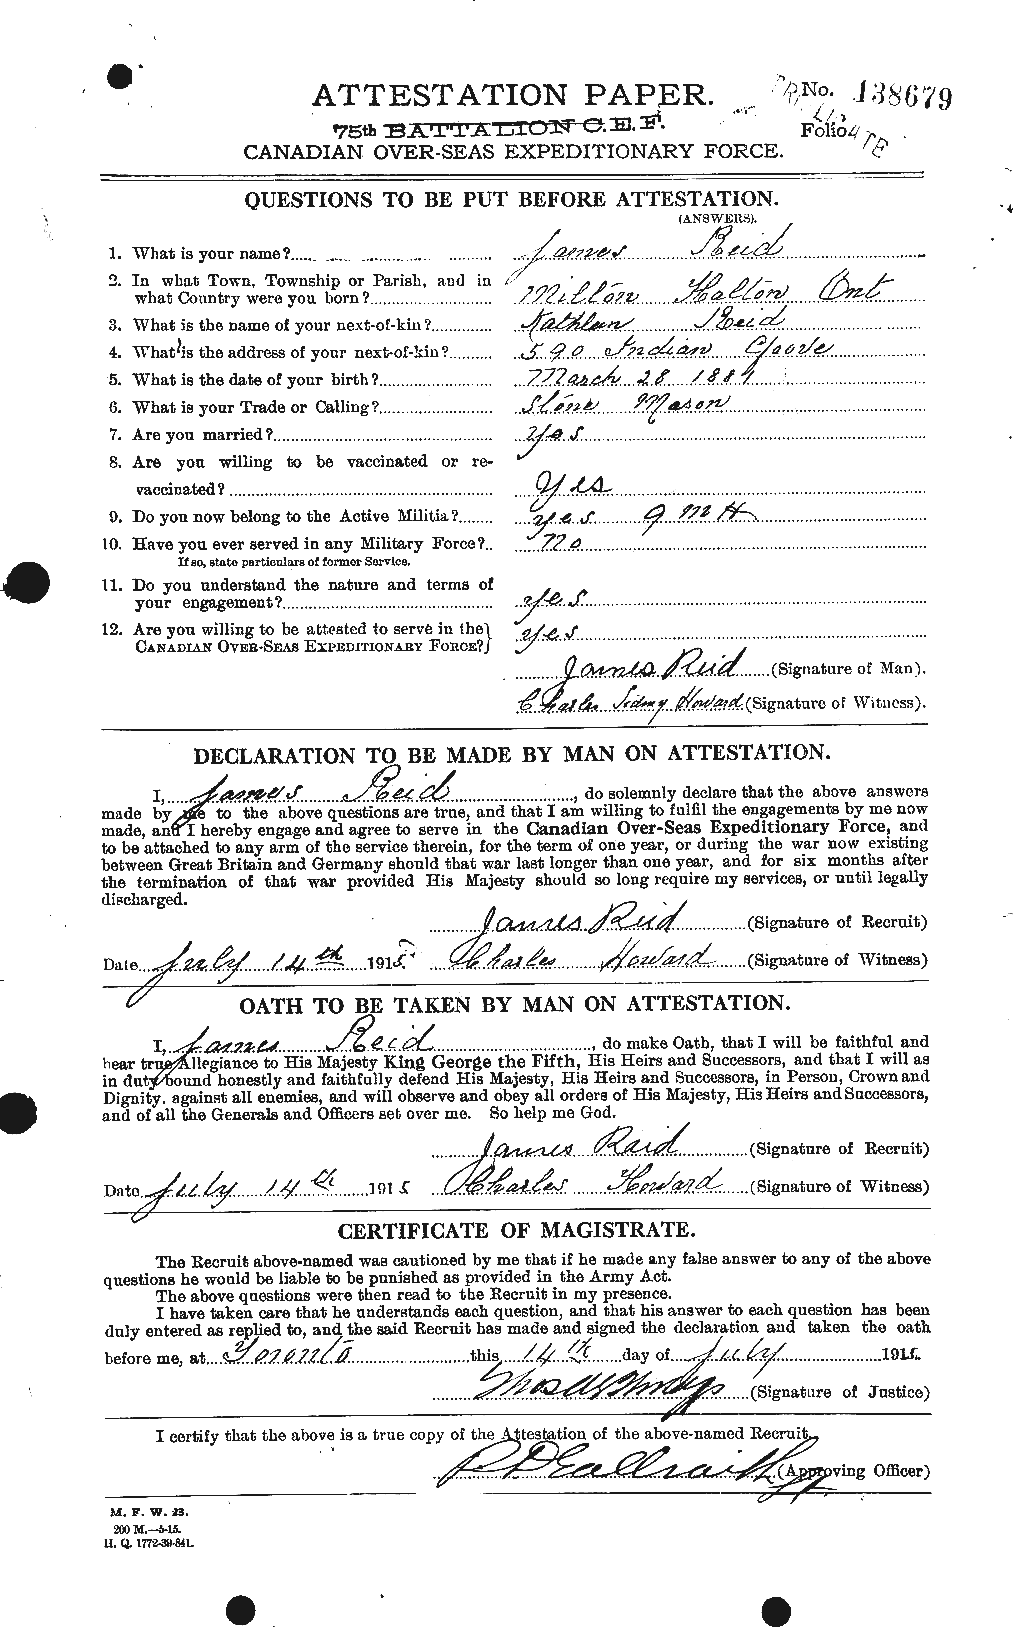 Personnel Records of the First World War - CEF 598654a